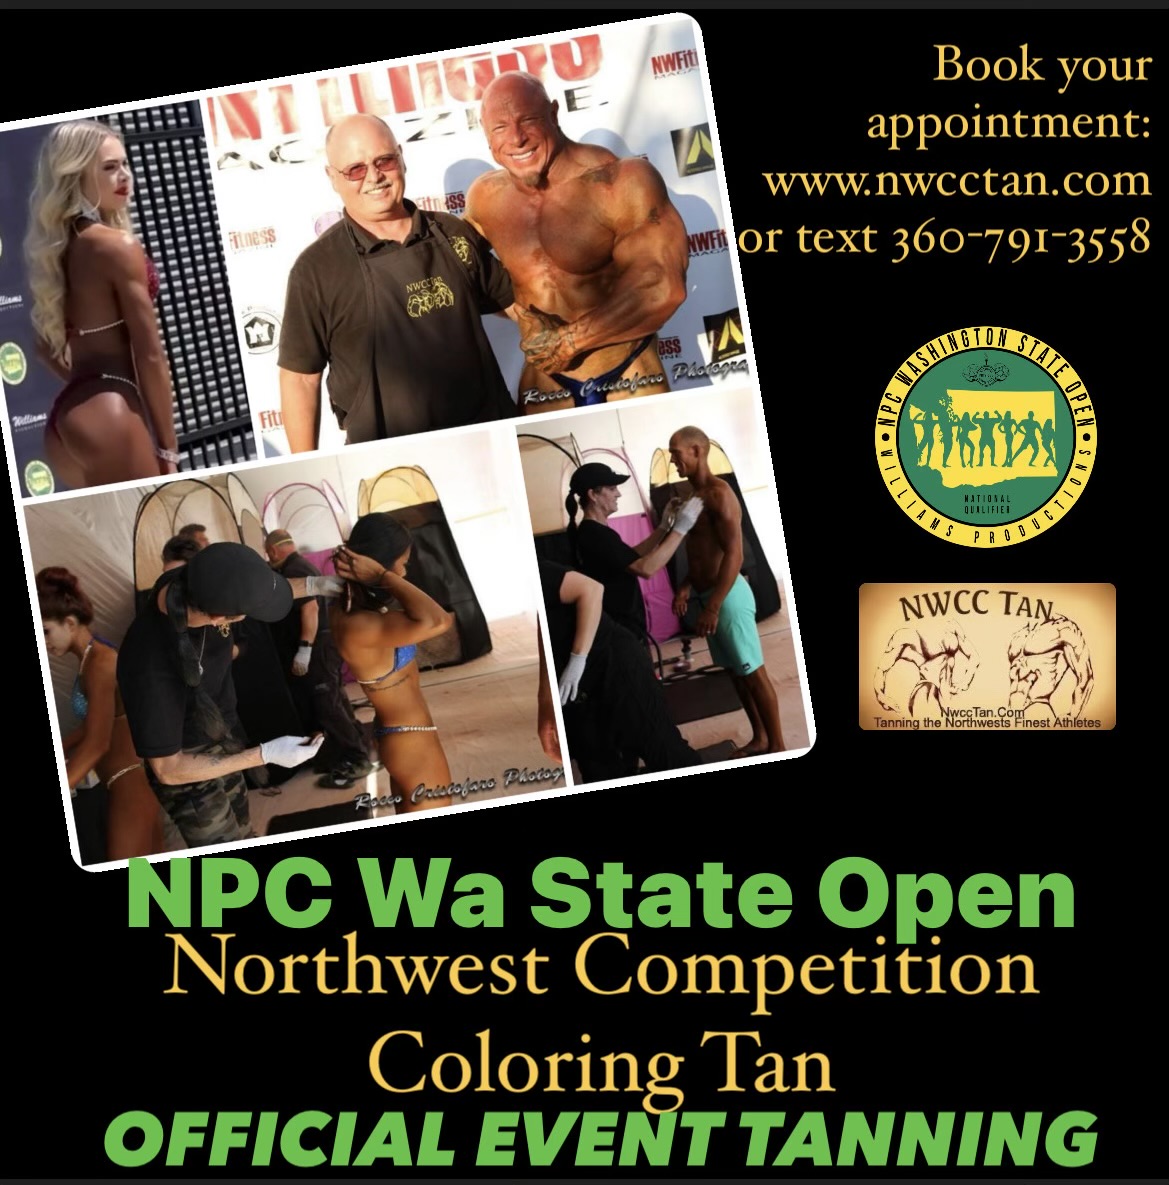 Collage of Bill Willyerd and Northwest Competition Coloring team tanning competitors at the NPC WA State Open.